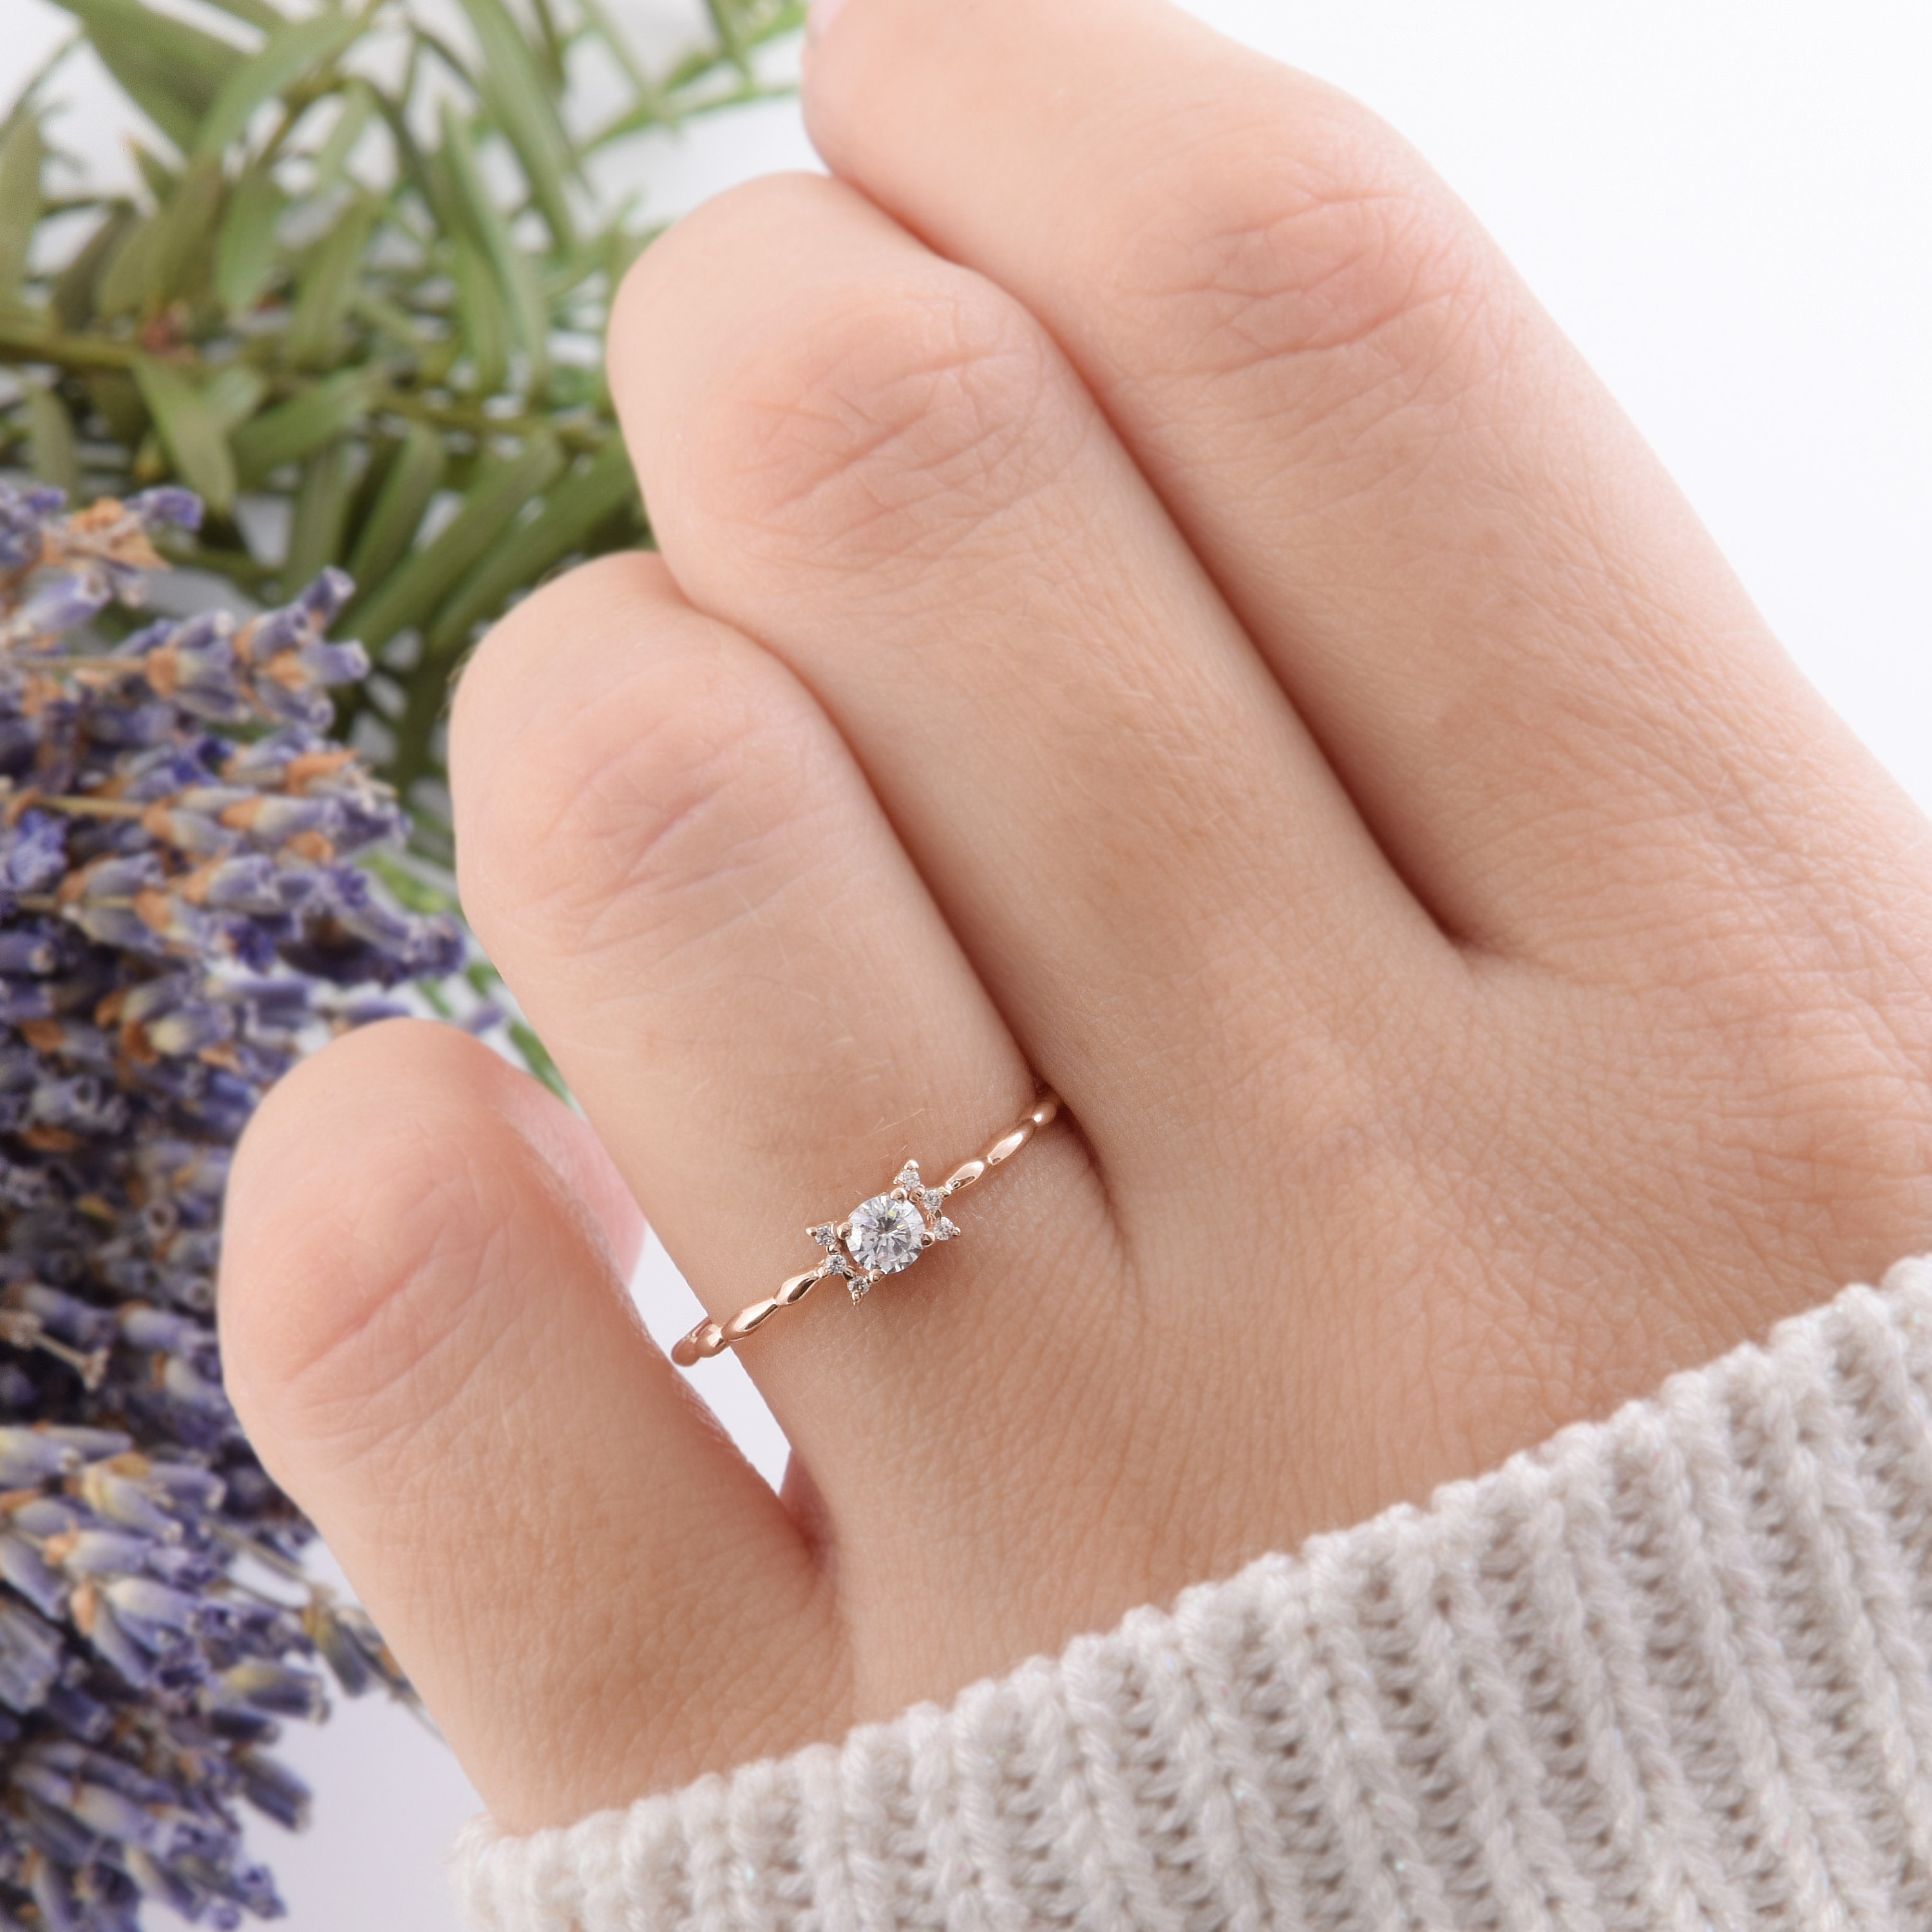 Heart Ring, Love Ring, Gold Ring, Dainty Ring, Bridesmaid Gifts, Cz Ring,  Gift for Her, Thin Ring, Statement Ring, HARLOW RING 